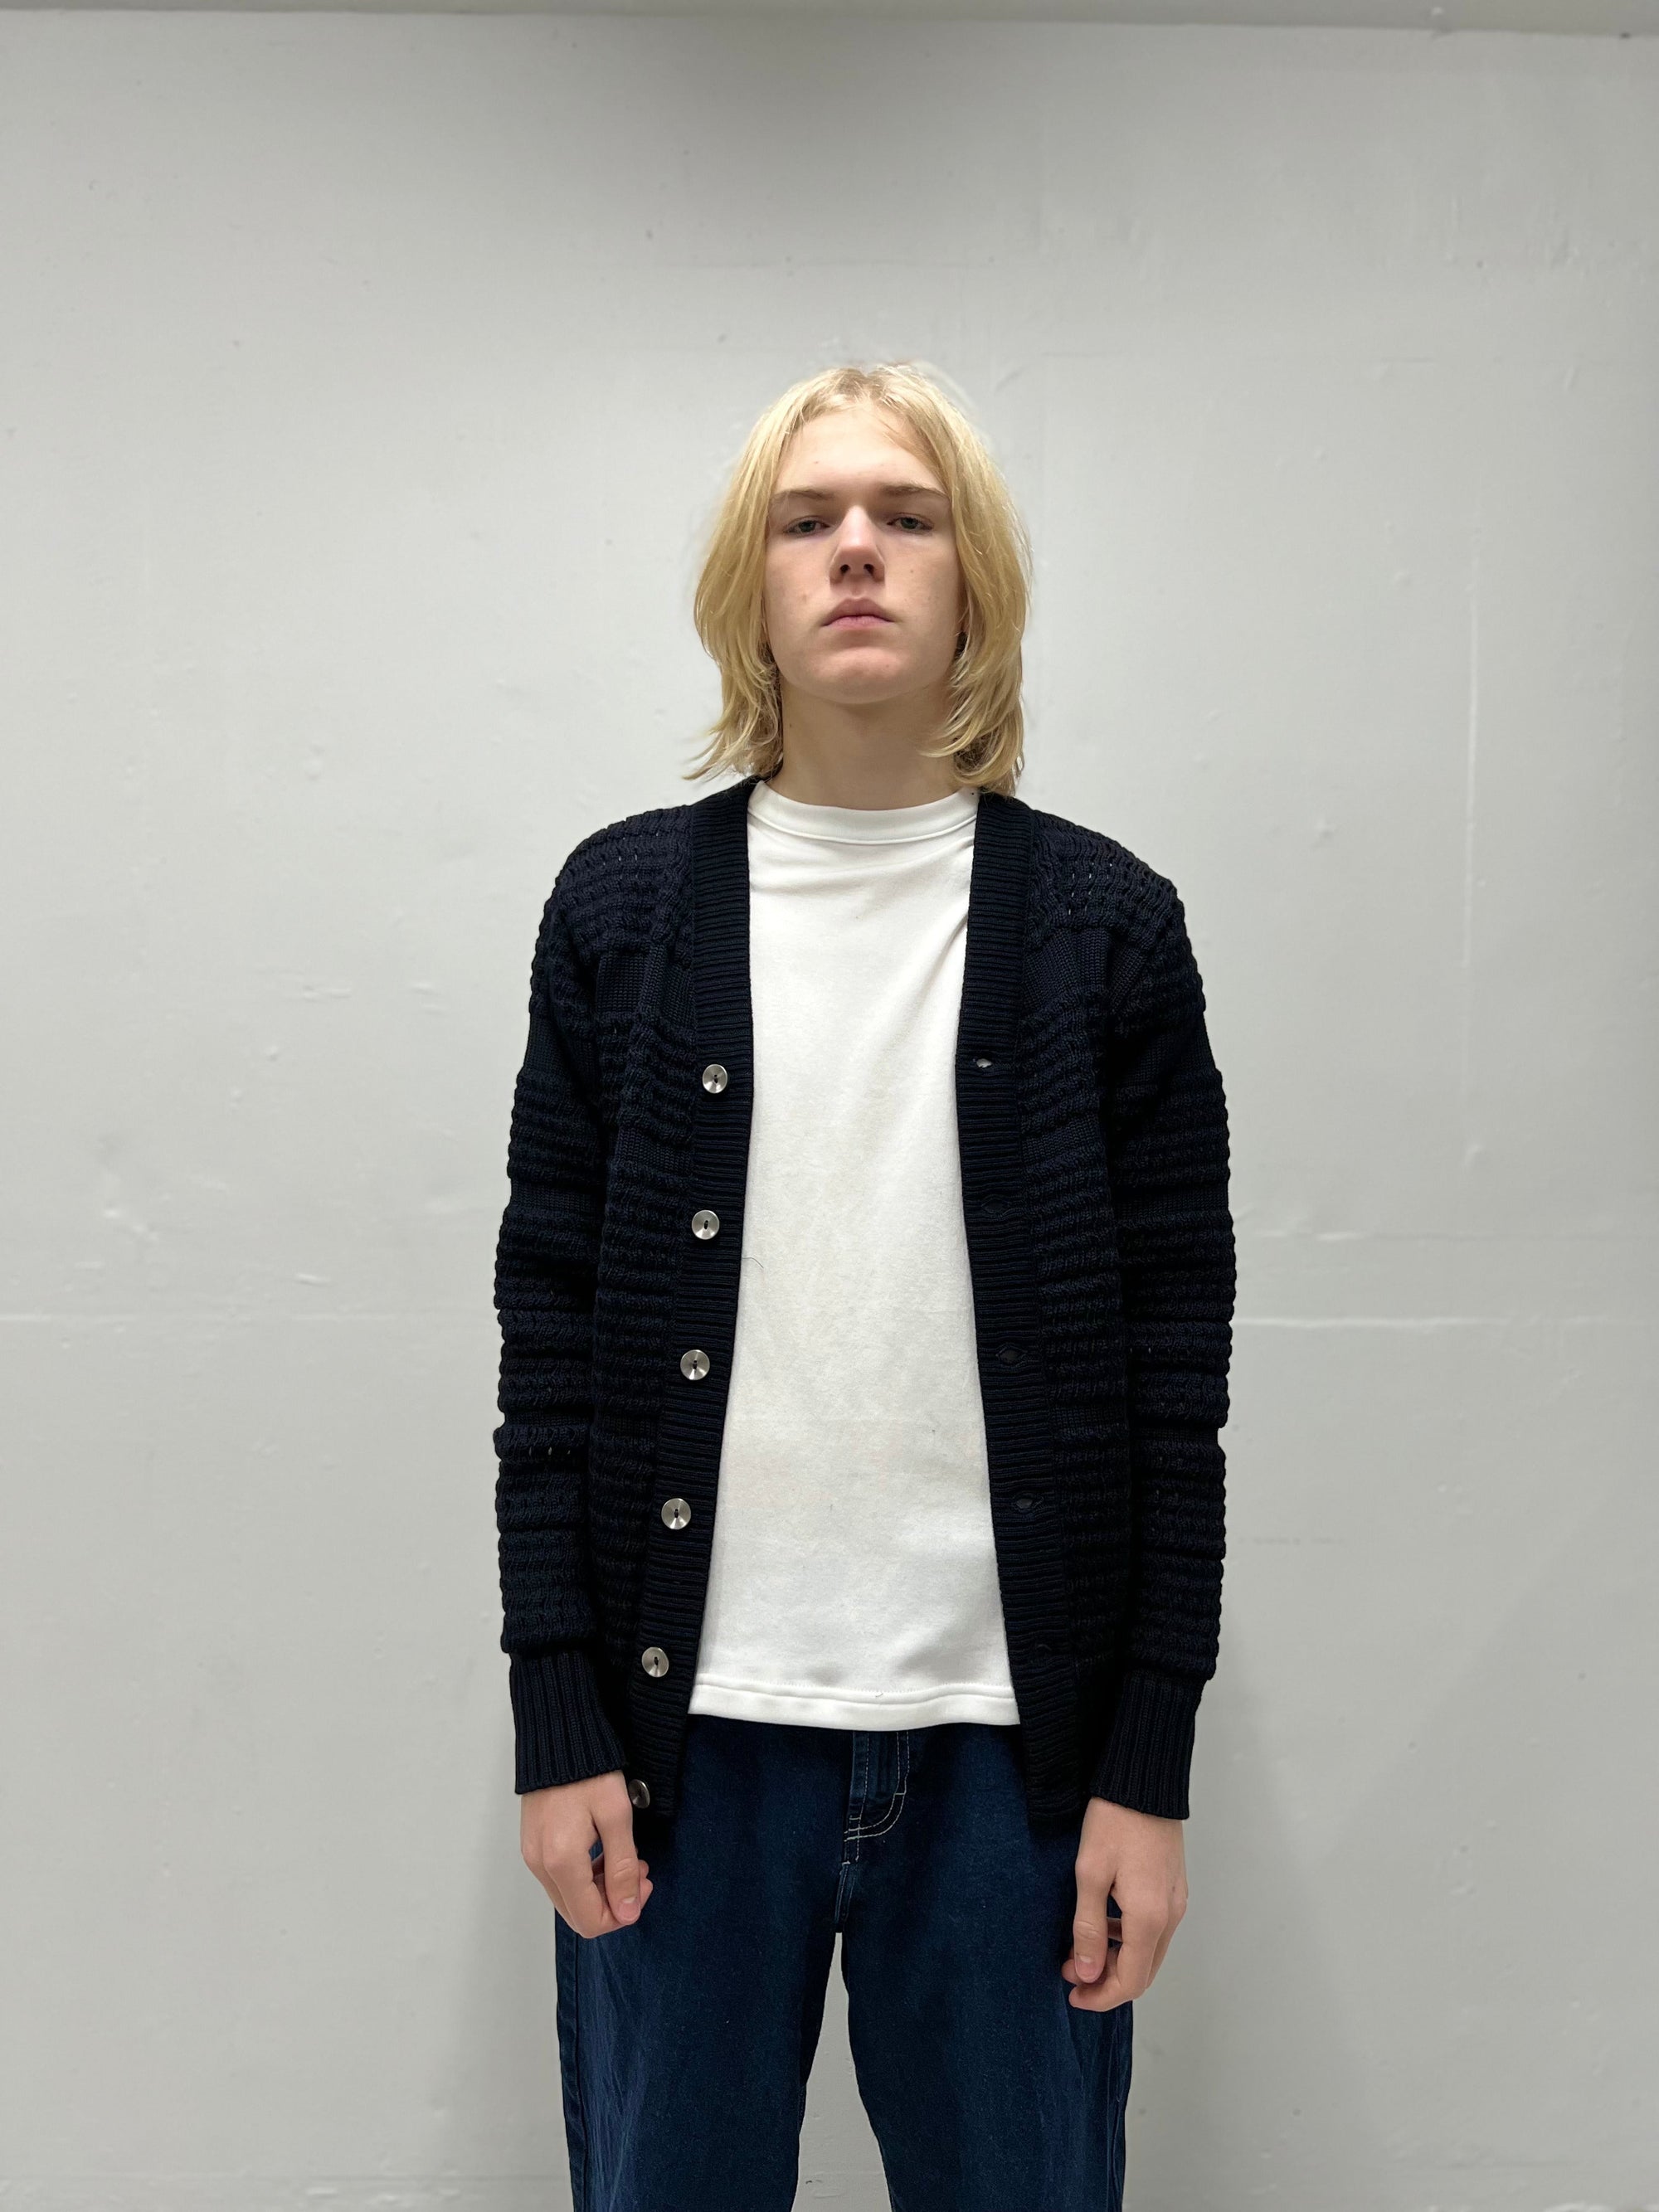 N. Archive | S. S. | blue ] RATIO Distributed – N. DA#015 cardigan, S. EUR - 2023 HERNING navy [ HERNING S.